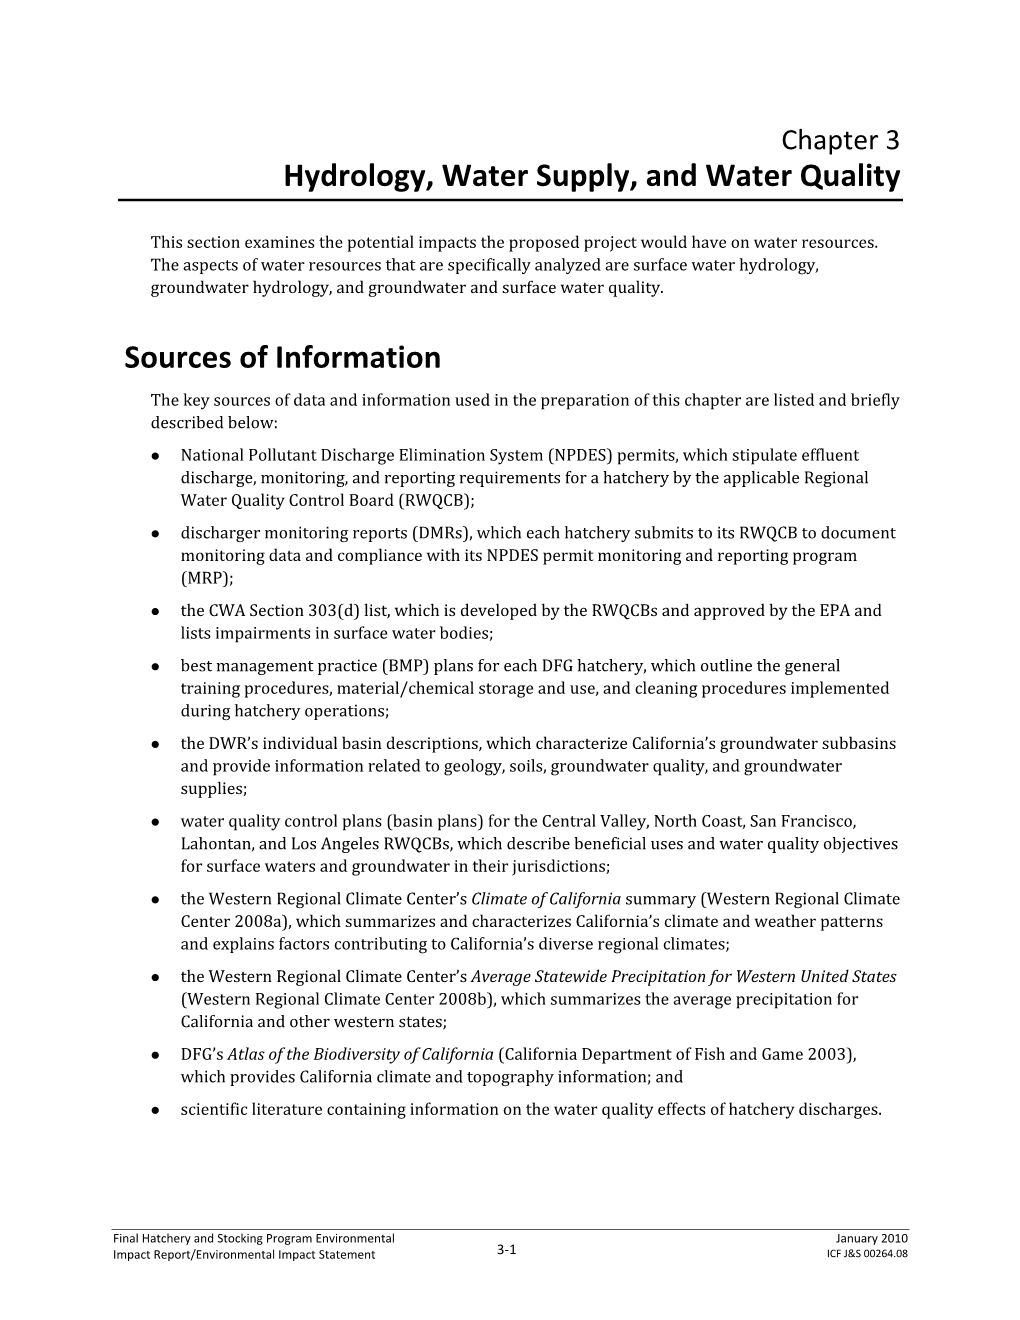 Hydrology, Water Supply, and Water Quality